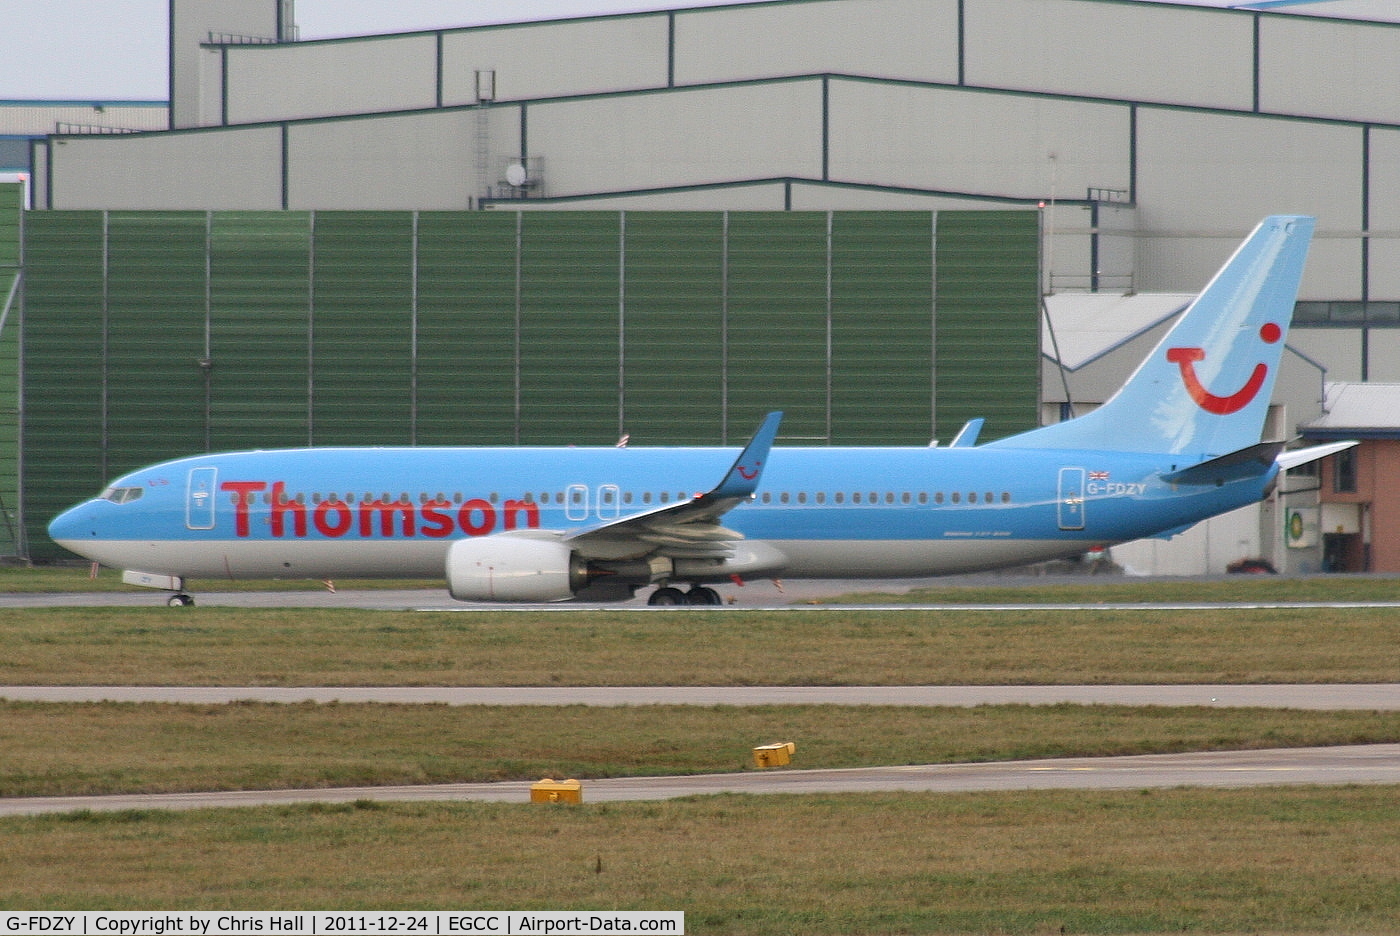 G-FDZY, 2011 Boeing 737-8K5 C/N 37261, New B737 for Thomson, delivered 23-11-2011